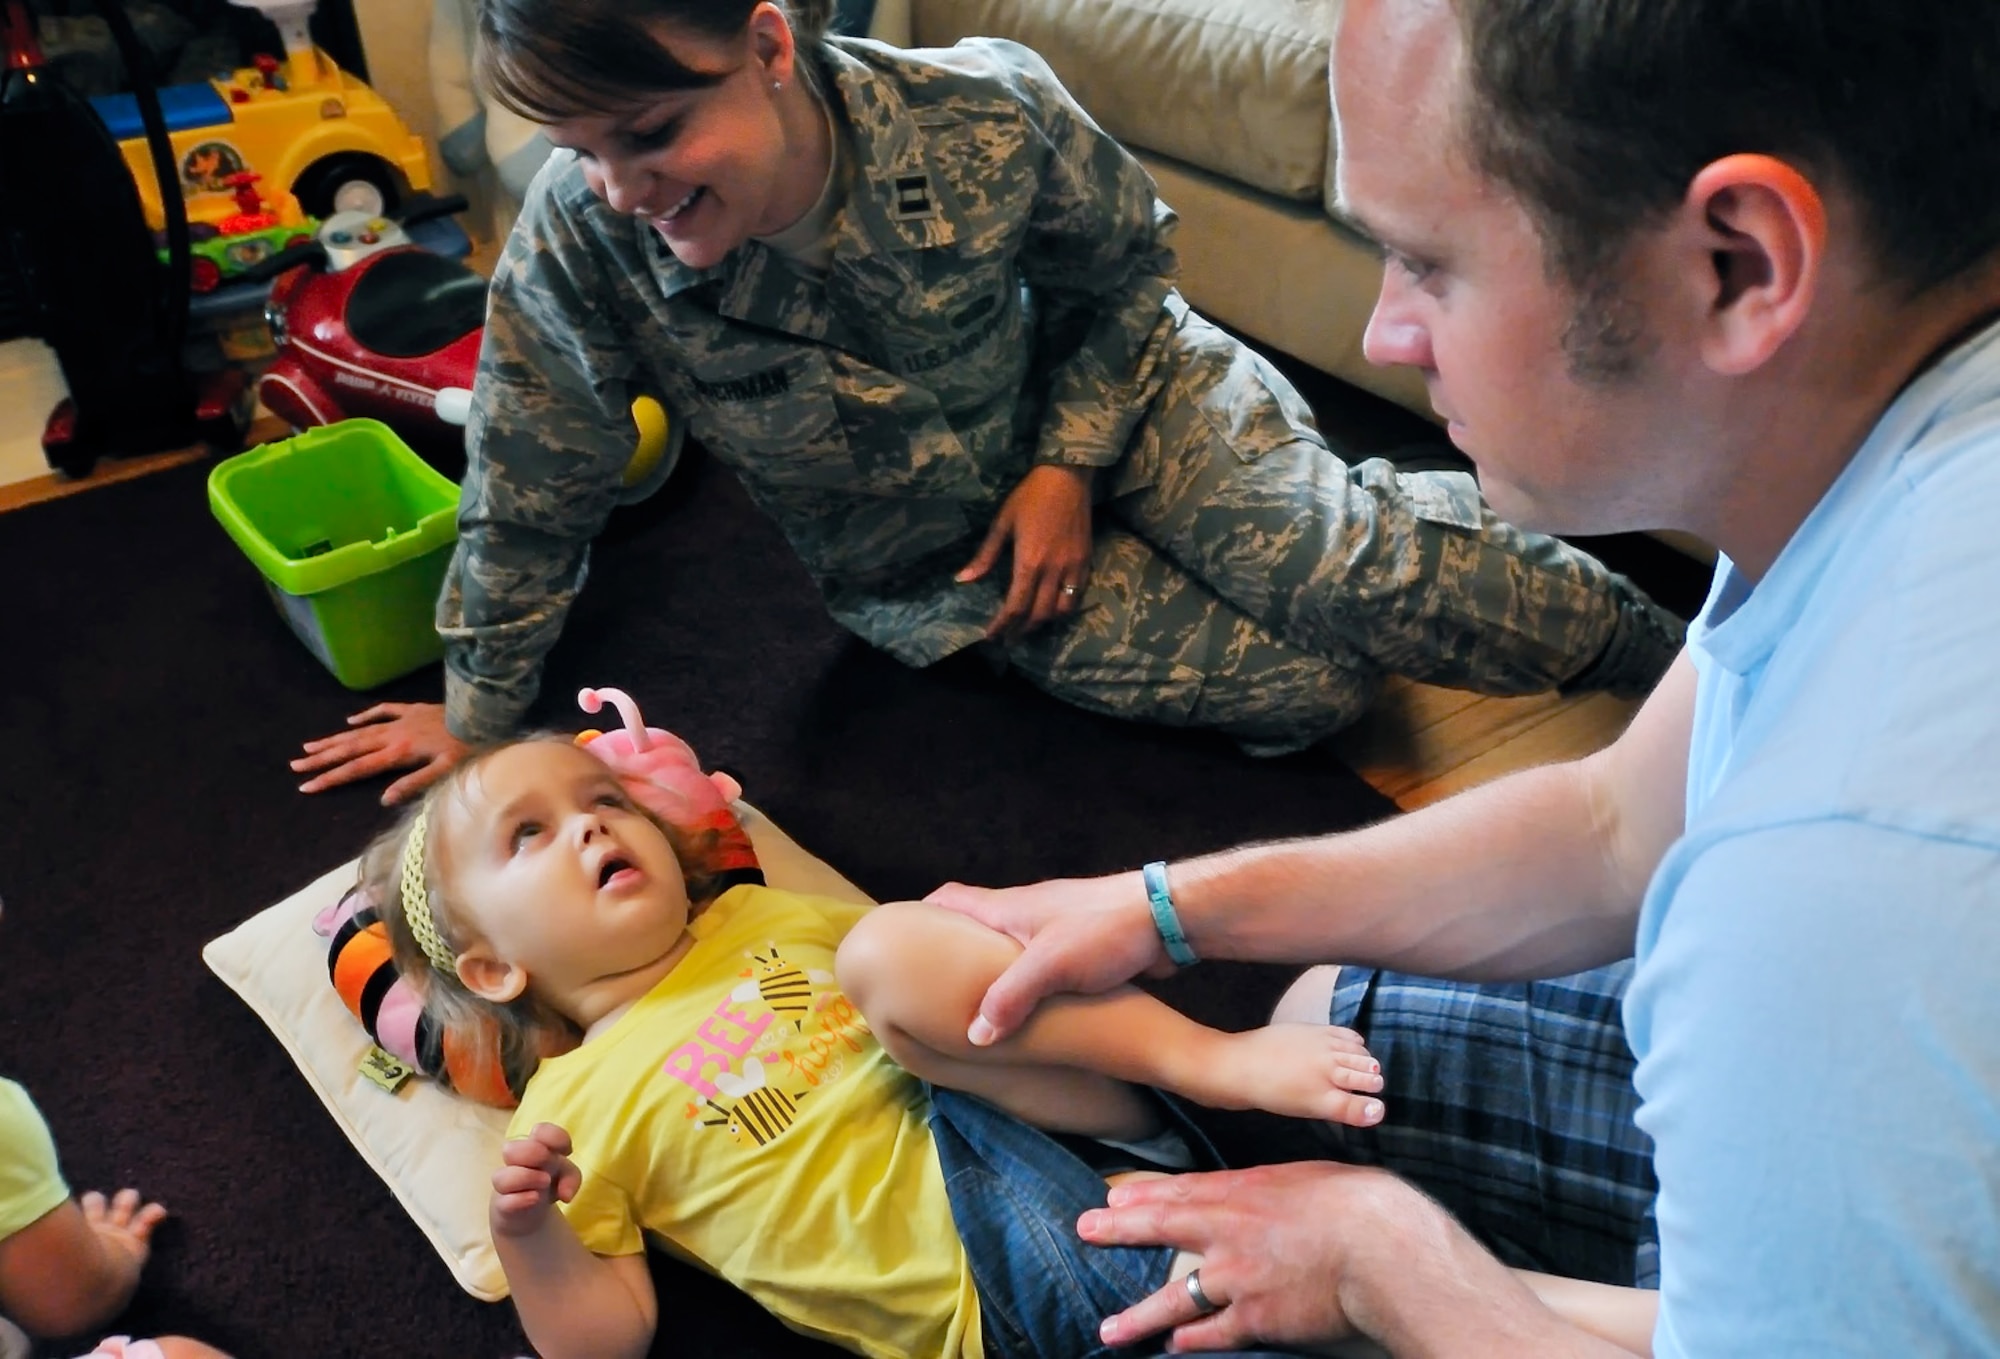 SCOTT AIR FORCE BASE, Ill. -- Capt. Kerri Rochman, 375th Mission Support Squadron chief of career development, watches her 3 1/2 year-old daughter Elise as her husband, Tim, performs their daily flexibility exercises on May 19. Elise was diagnosed more than two years ago with Tays-Sachs disease, an inherited incurable disease of the central nervous system. (U.S. Air Force photo/Master Sgt. Maurice Hessel)